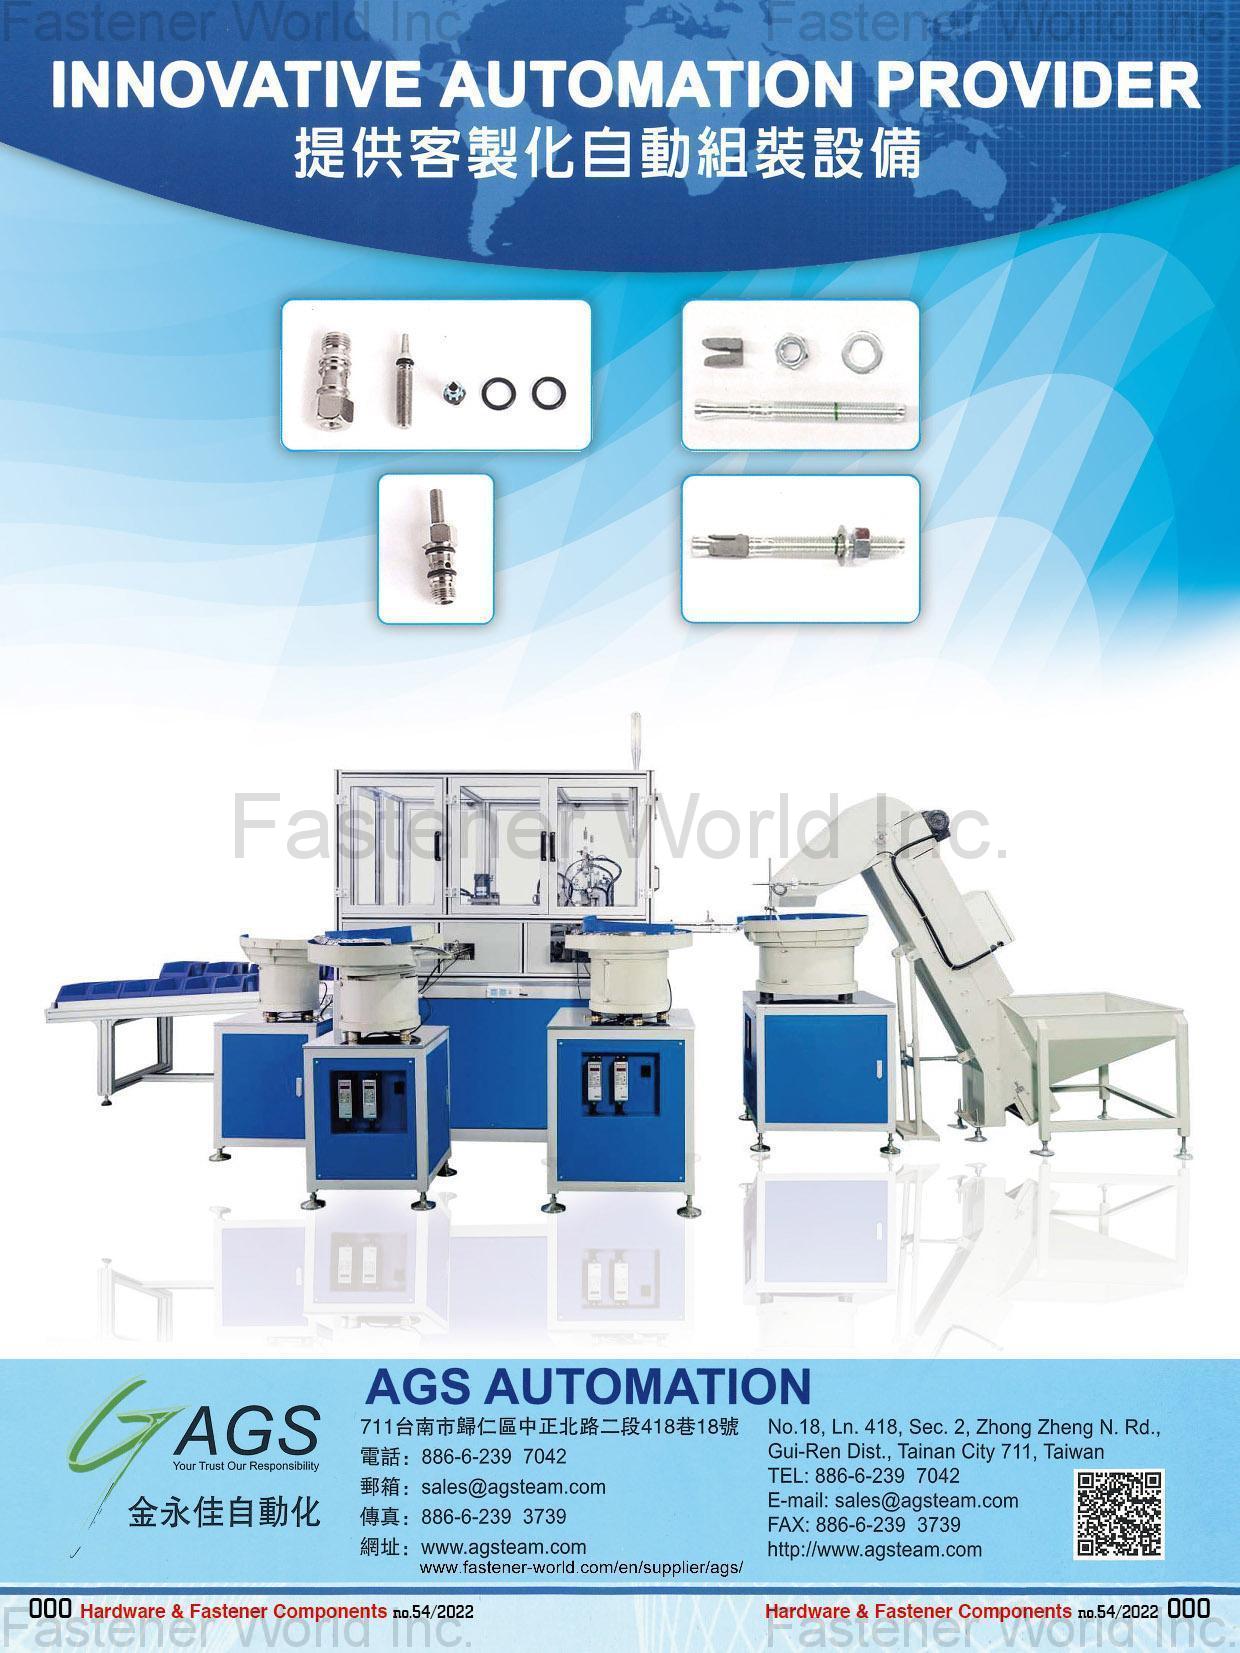 AGS AUTOMATION (ADVANCED GLOBAL SOURCING LTD.) , Innovative Automation Provider